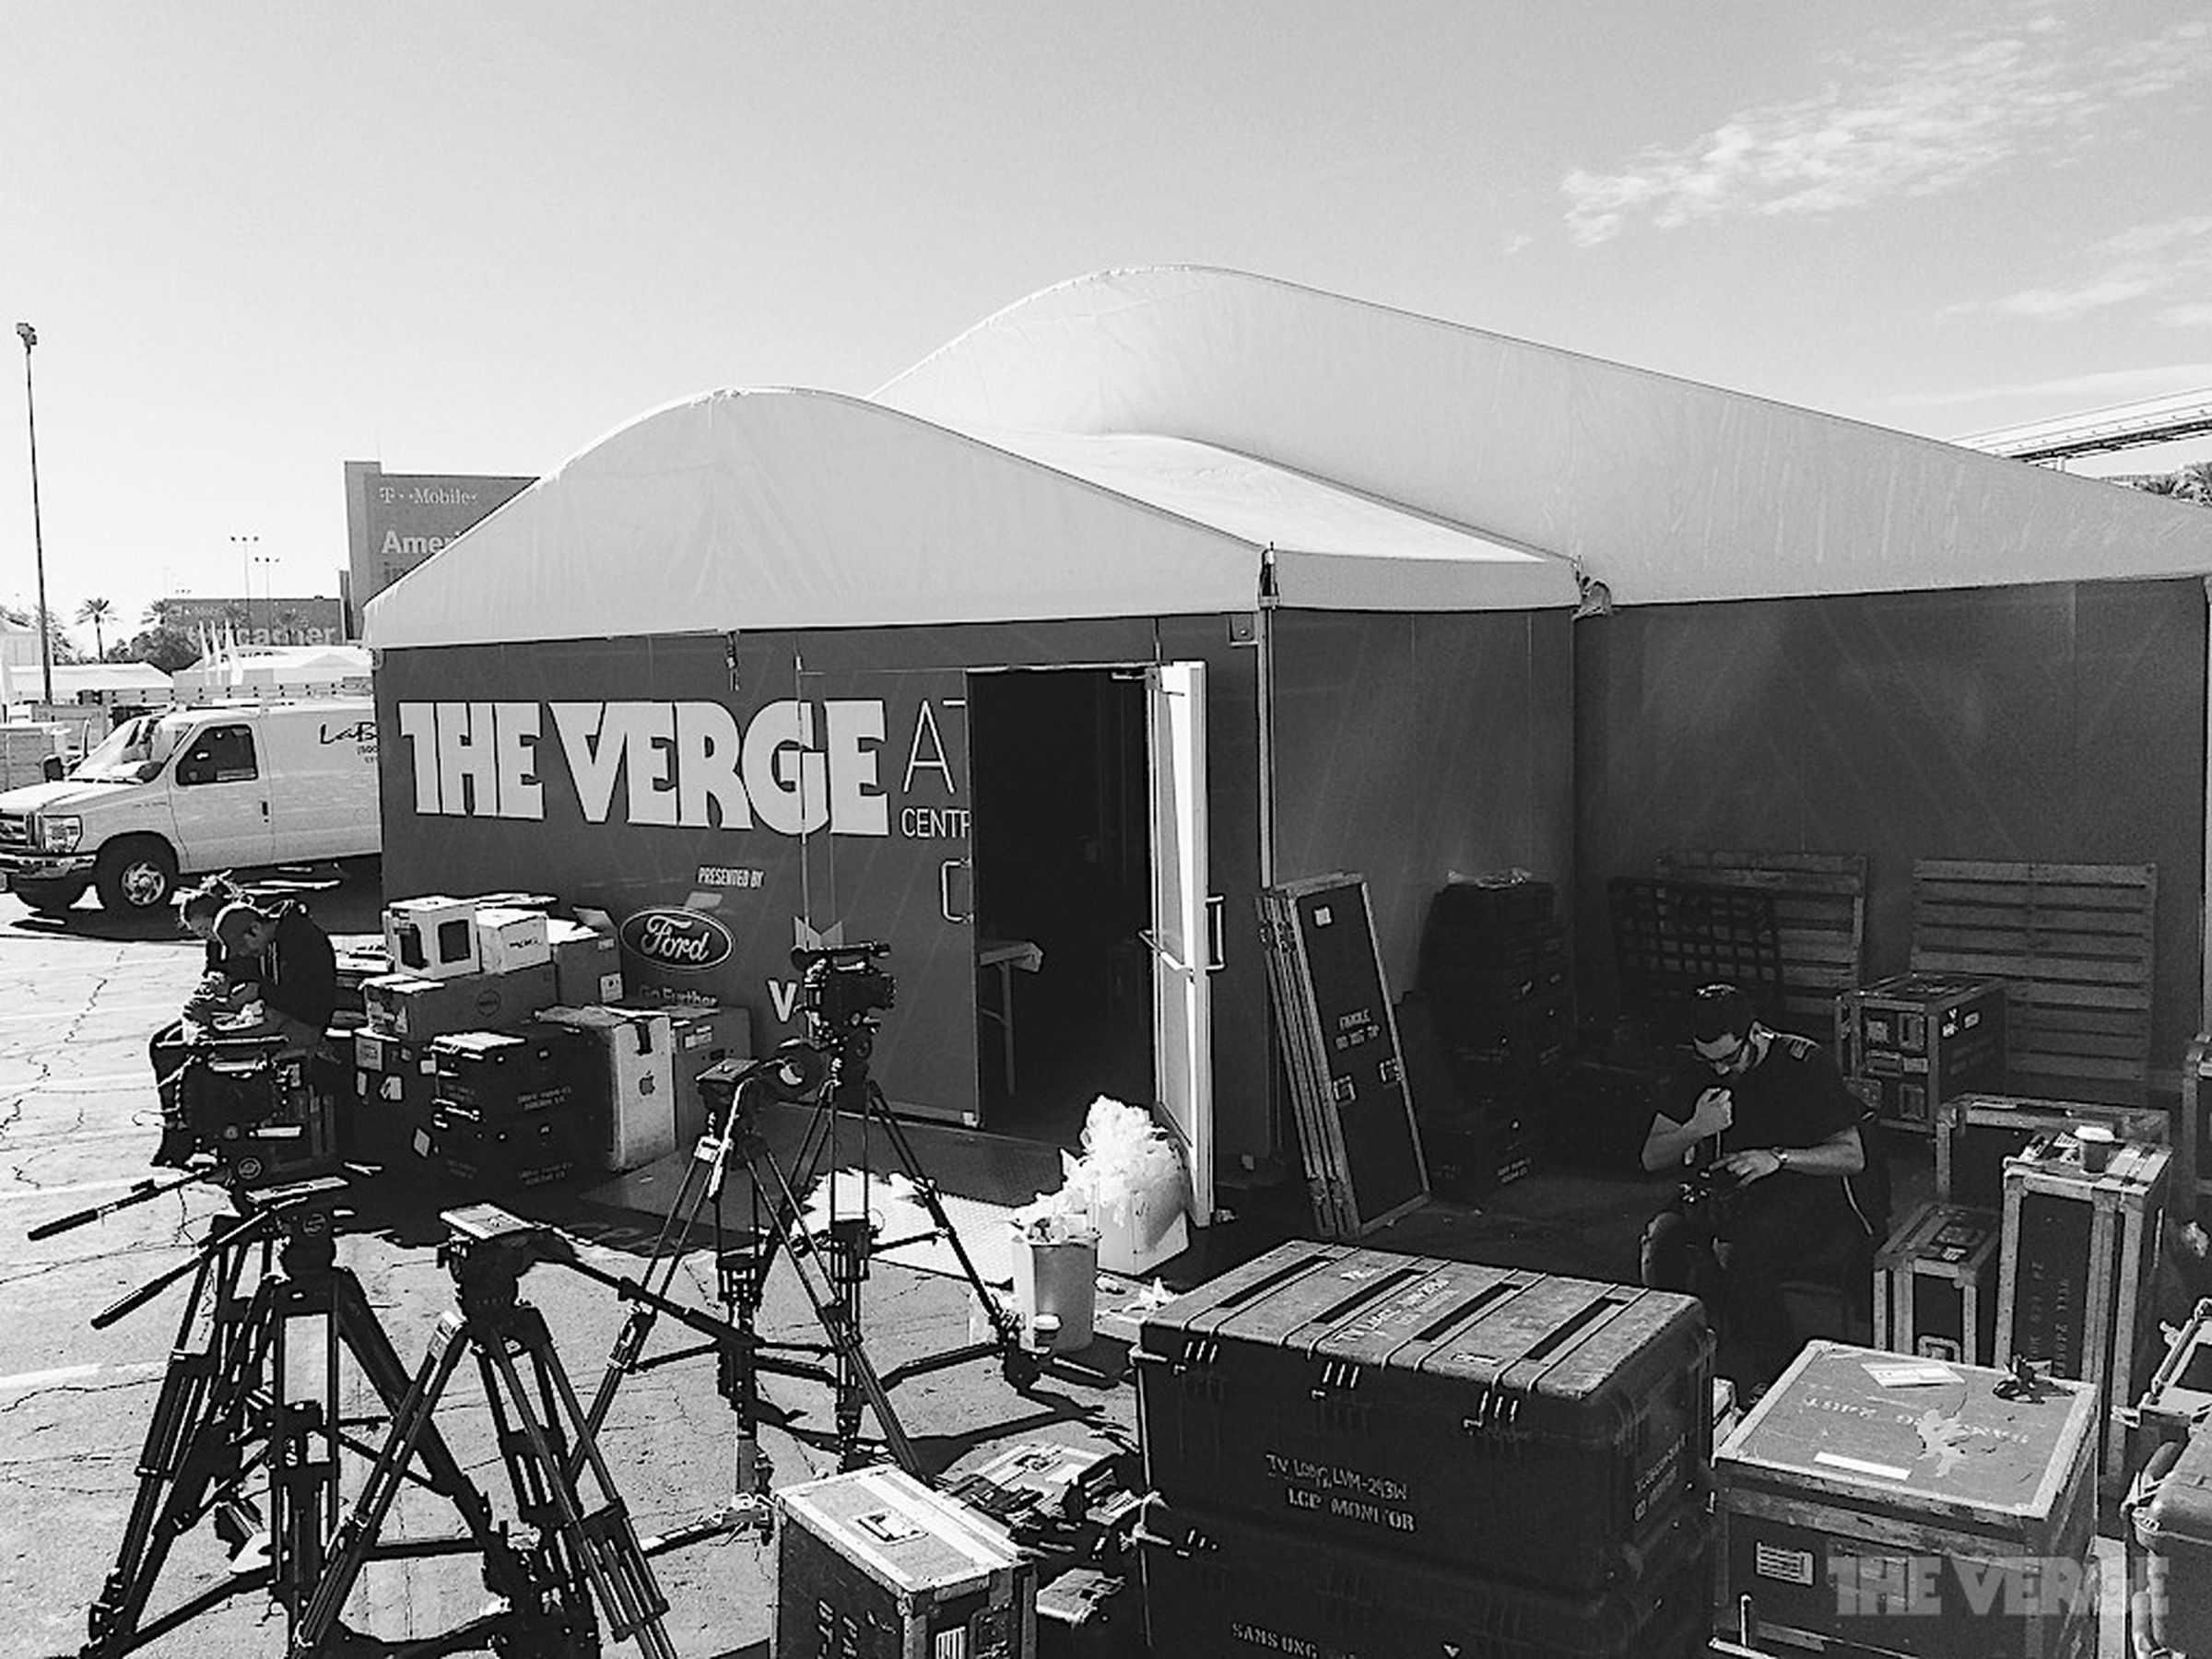 CES 2014: behind the scenes